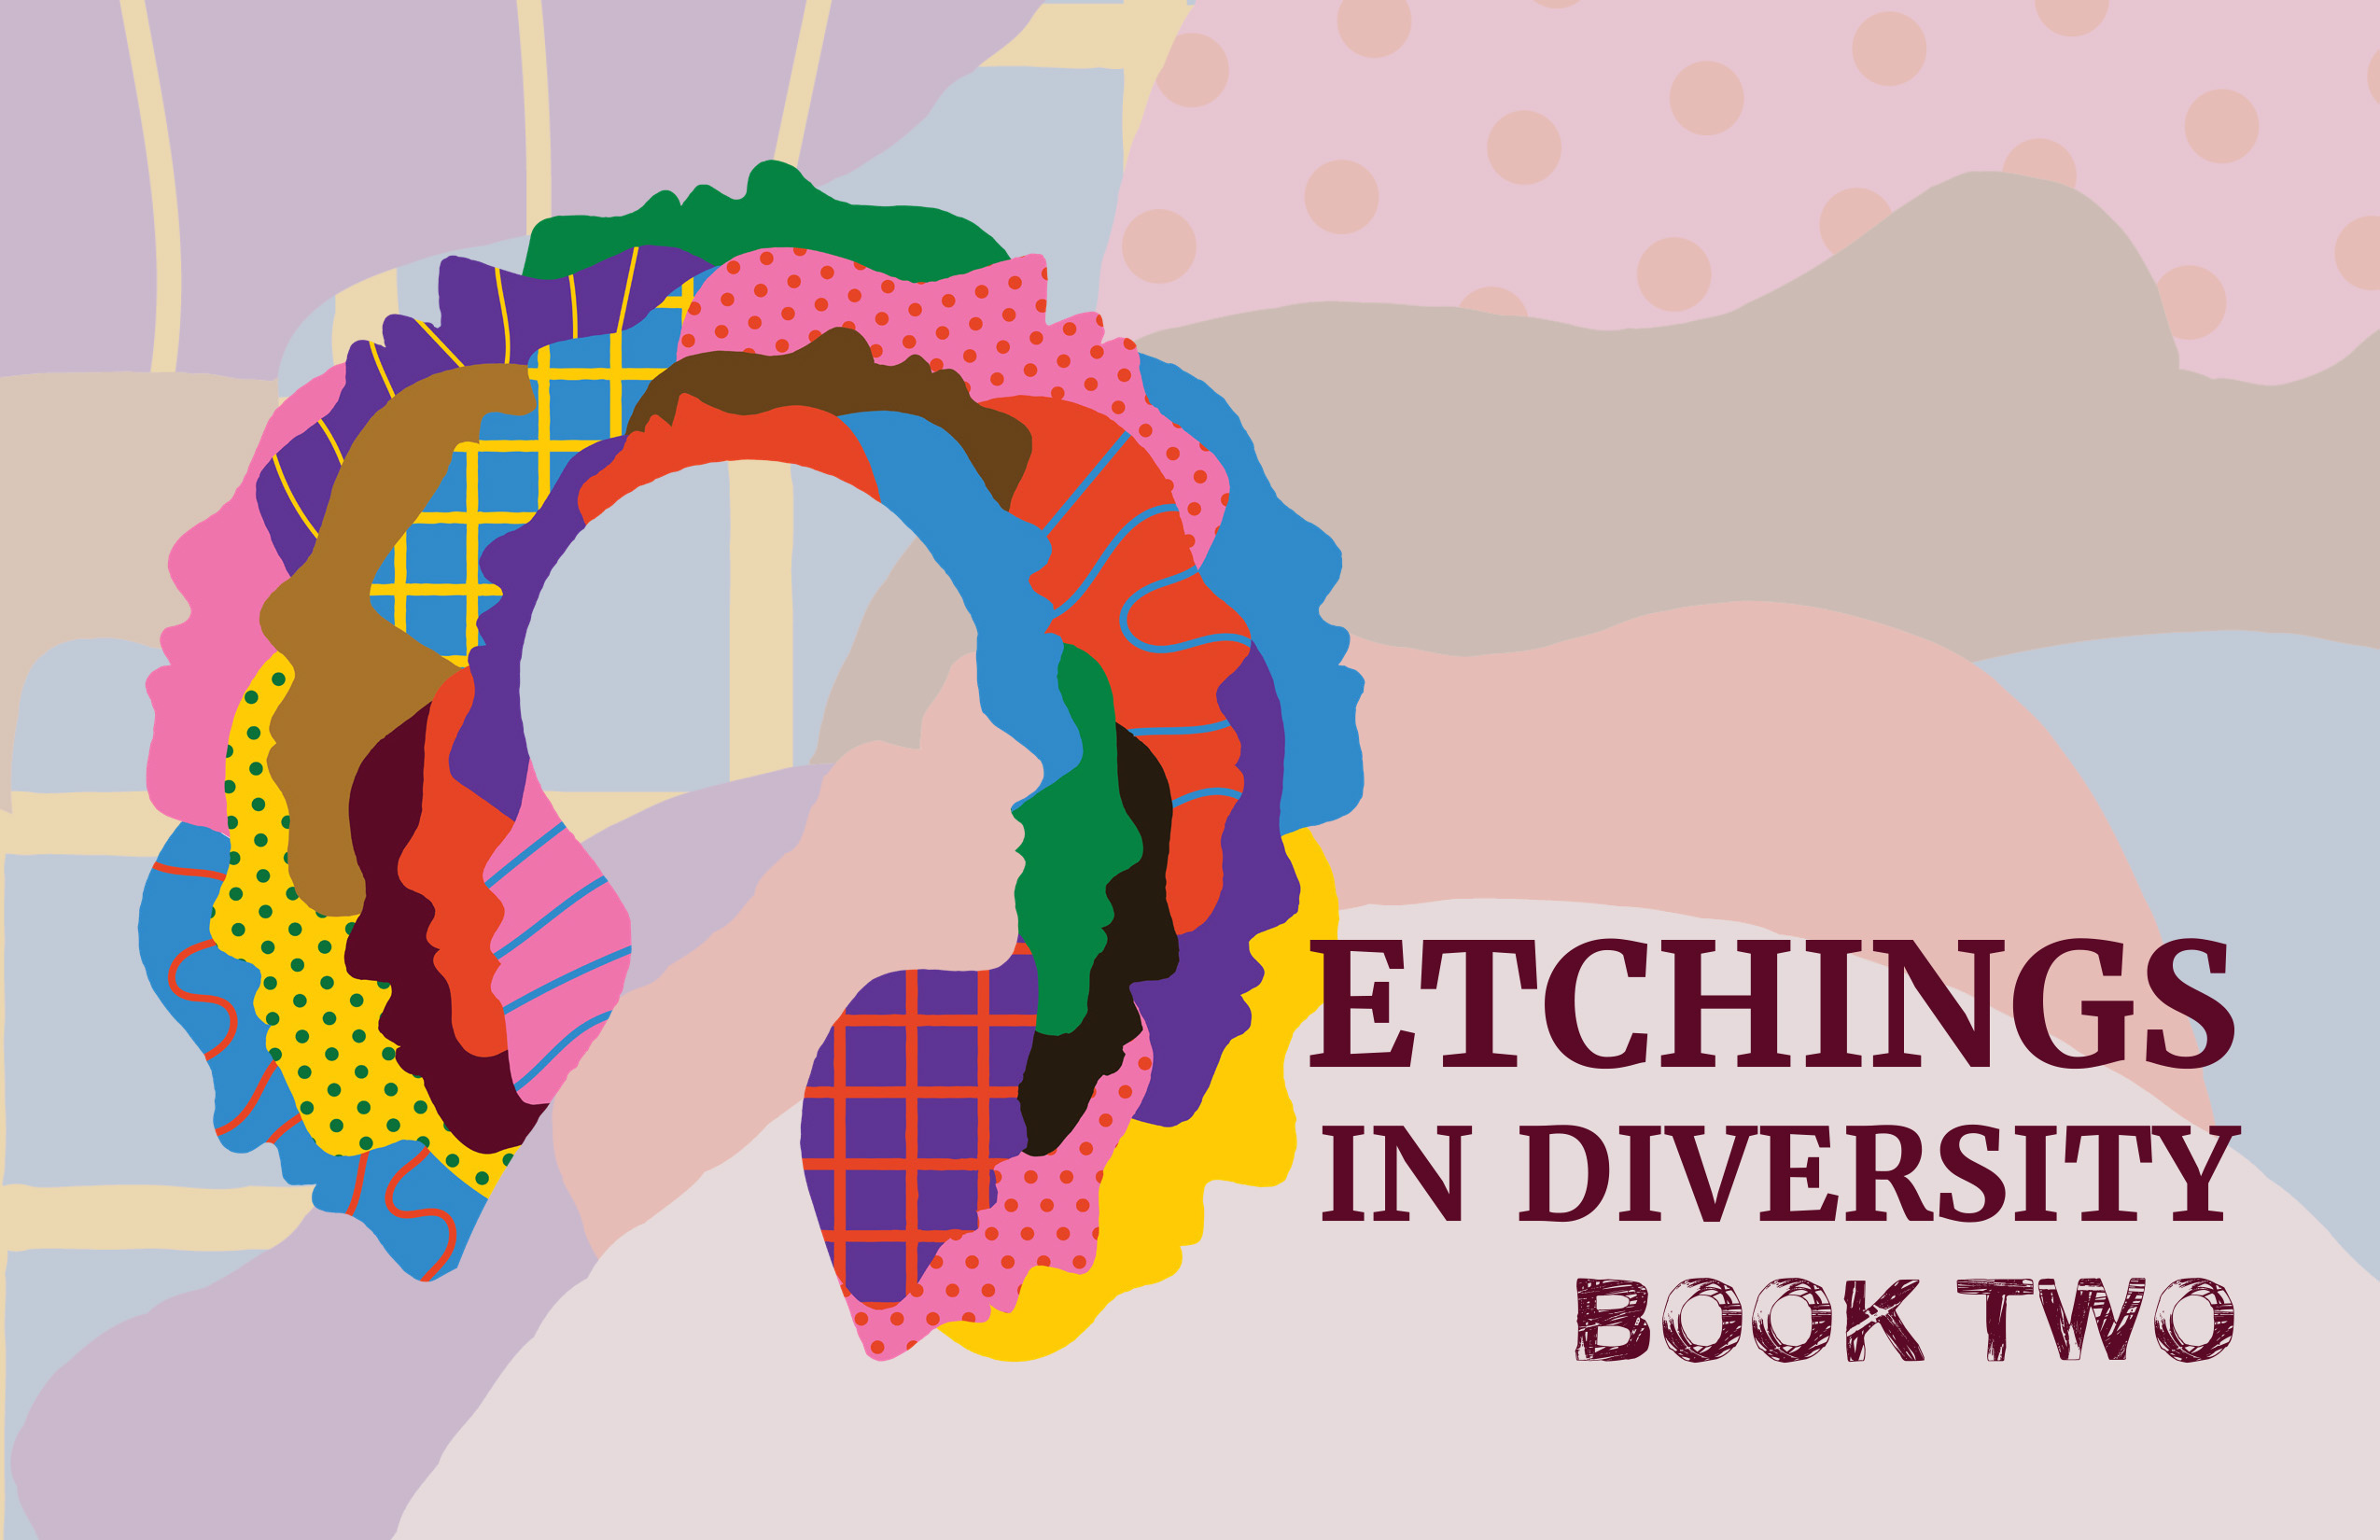 Etchings in Diversity: Book Two